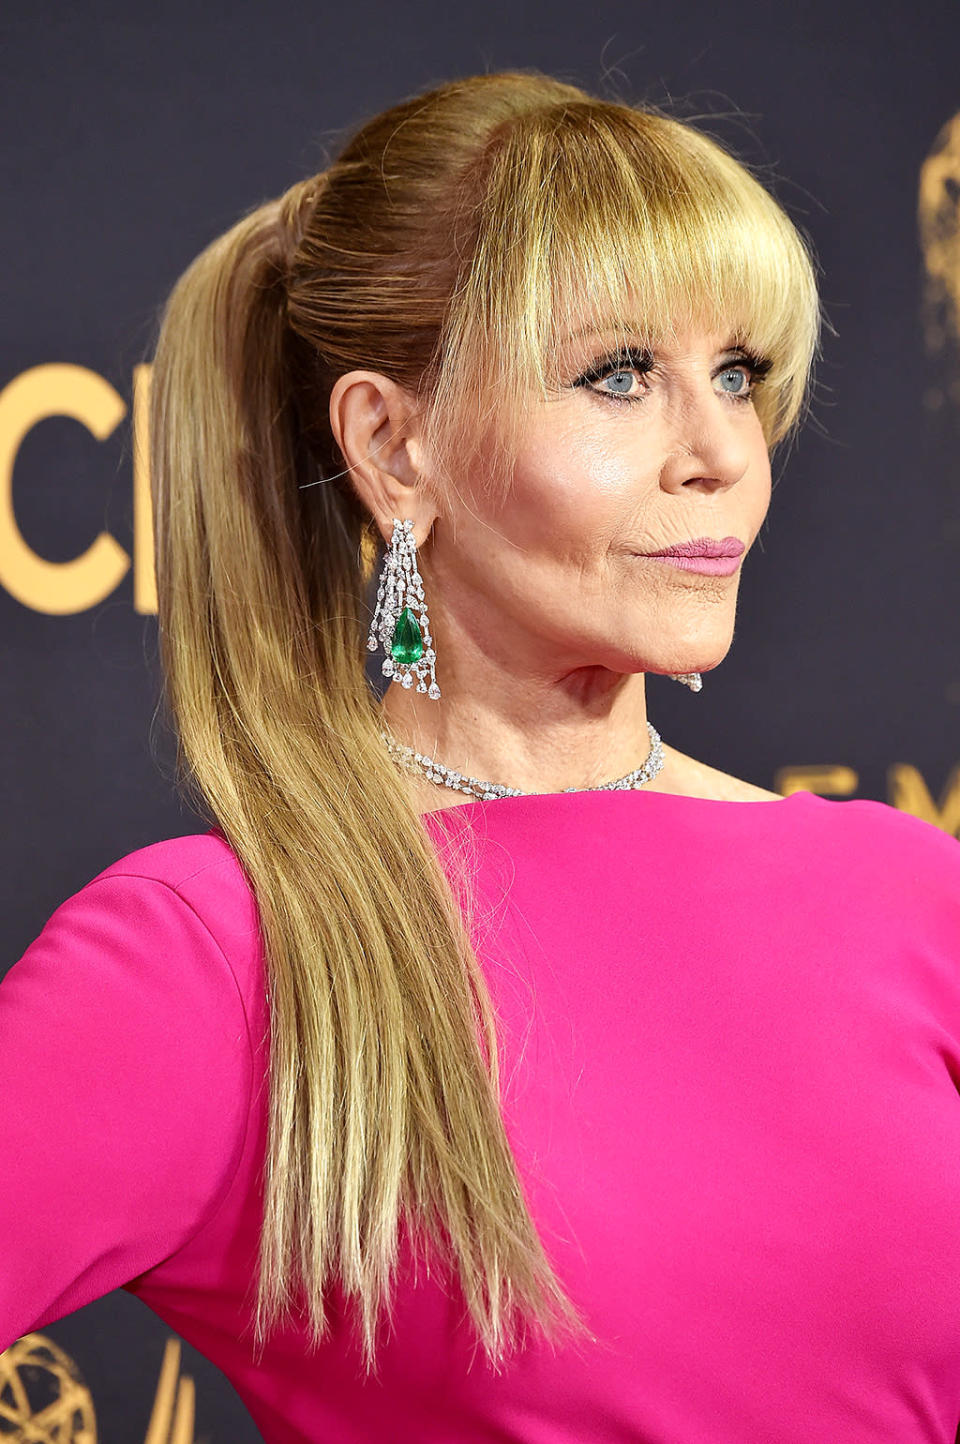 Jane Fonda attends the 69th Primetime Emmy Awards with a completely new look. (Photo: Frazer Harrison/Getty Images)